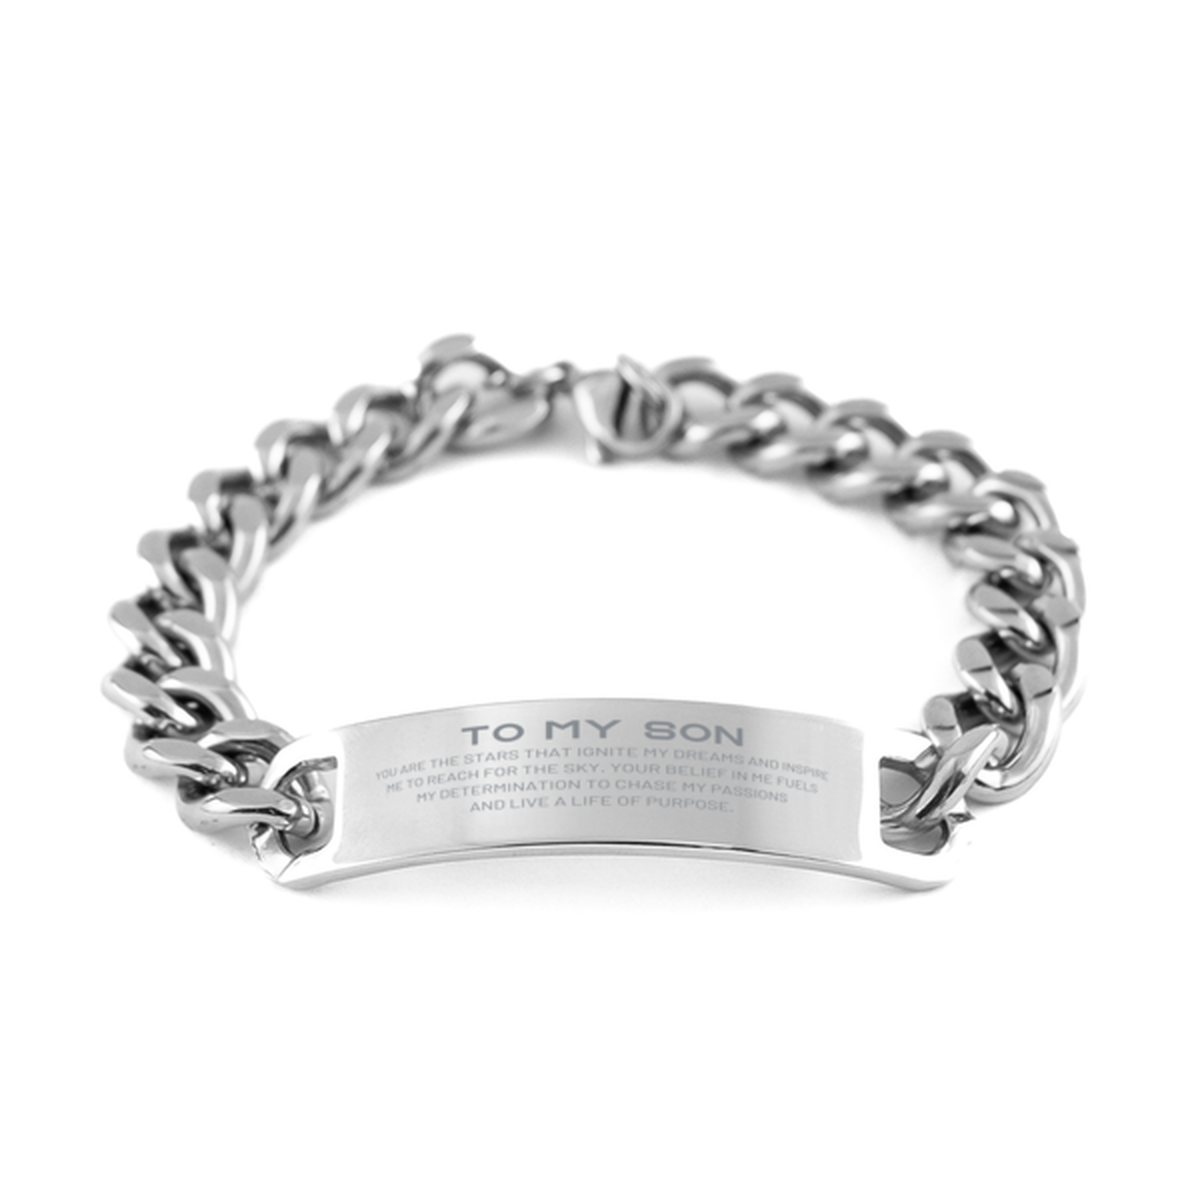 To My Son Cuban Chain Stainless Steel Bracelet, You are the stars that ignite my dreams and inspire me to reach for the sky, Birthday Unique Gifts For Son, Thank You Gifts For Son